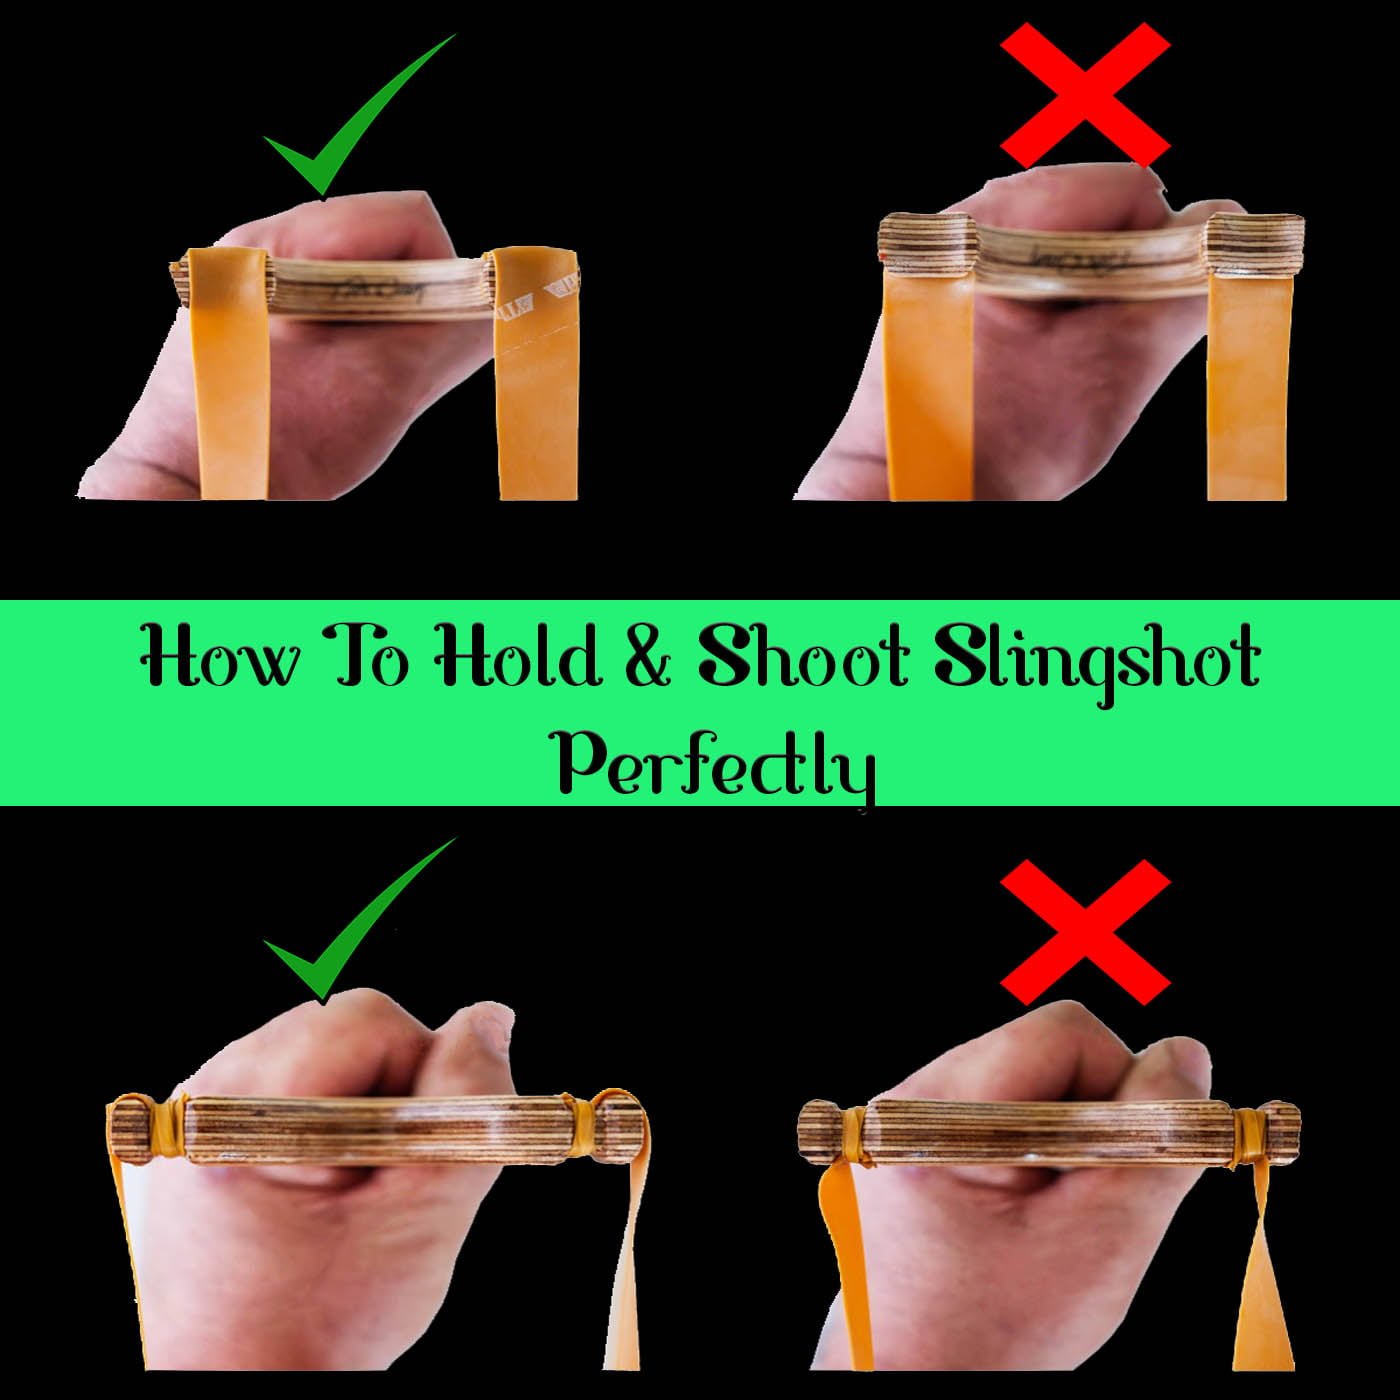 How To shoot a slingshot